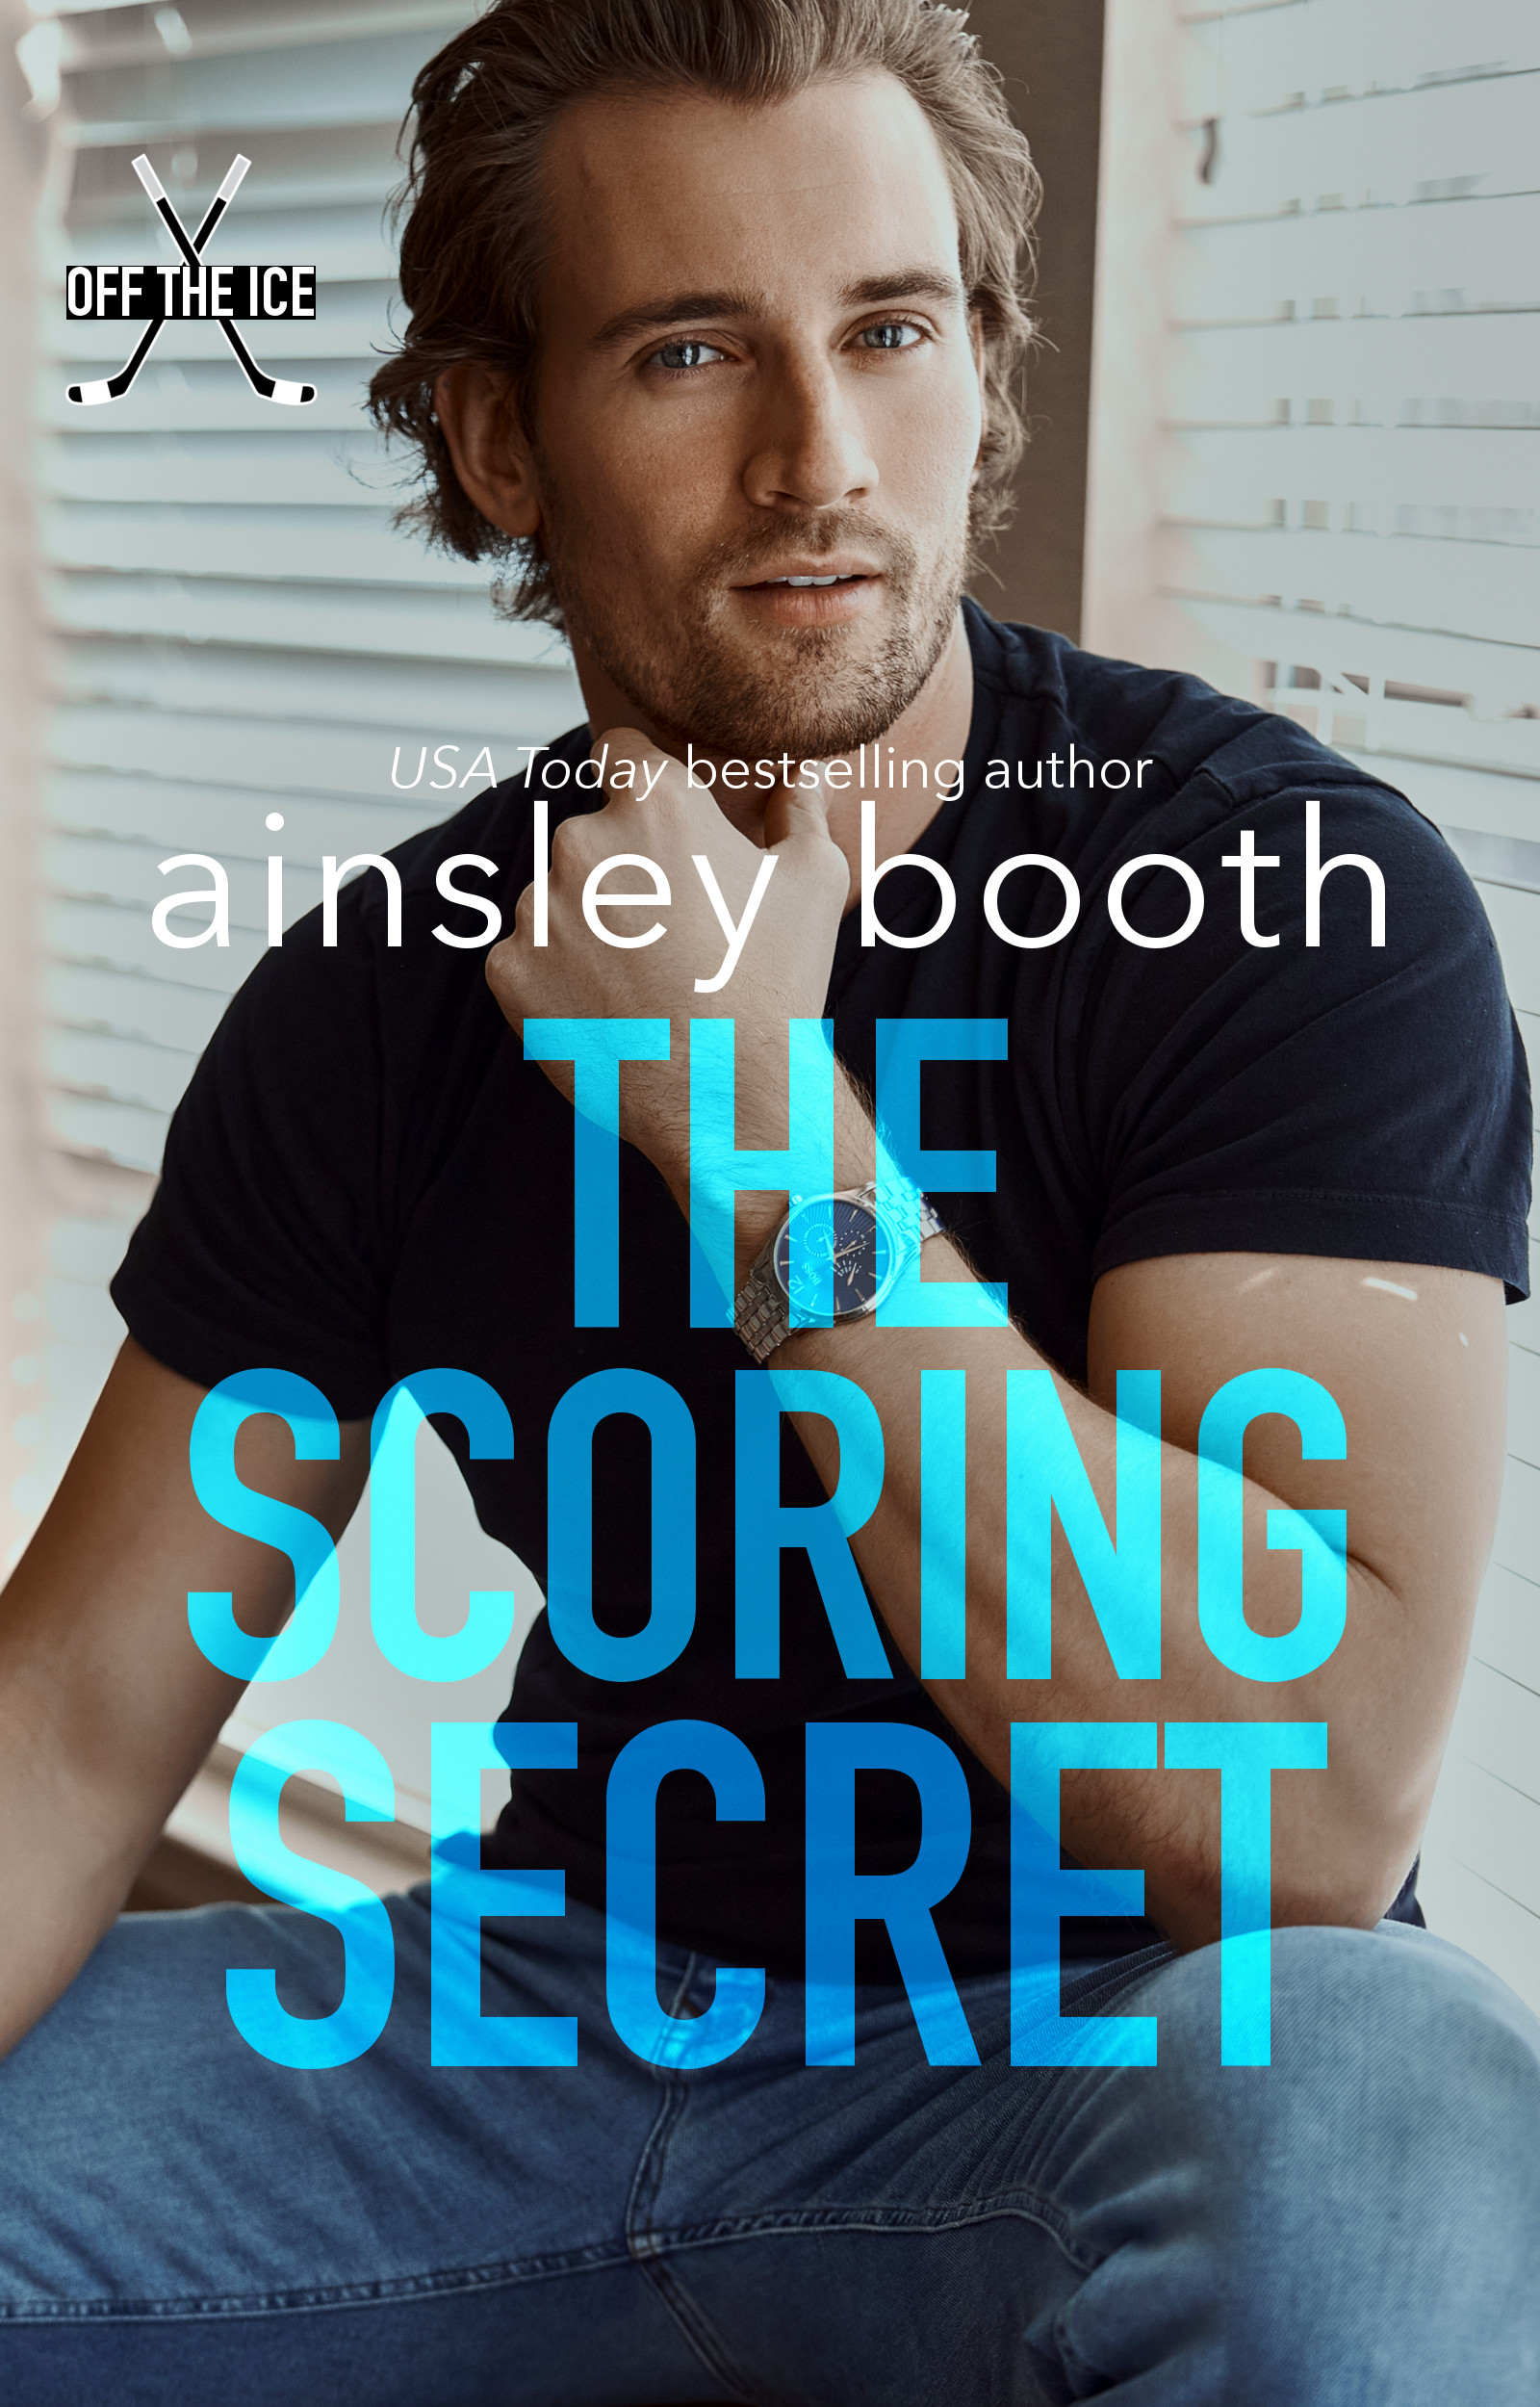 Two chapter preview of The Scoring Secret (Ty Connor's book)